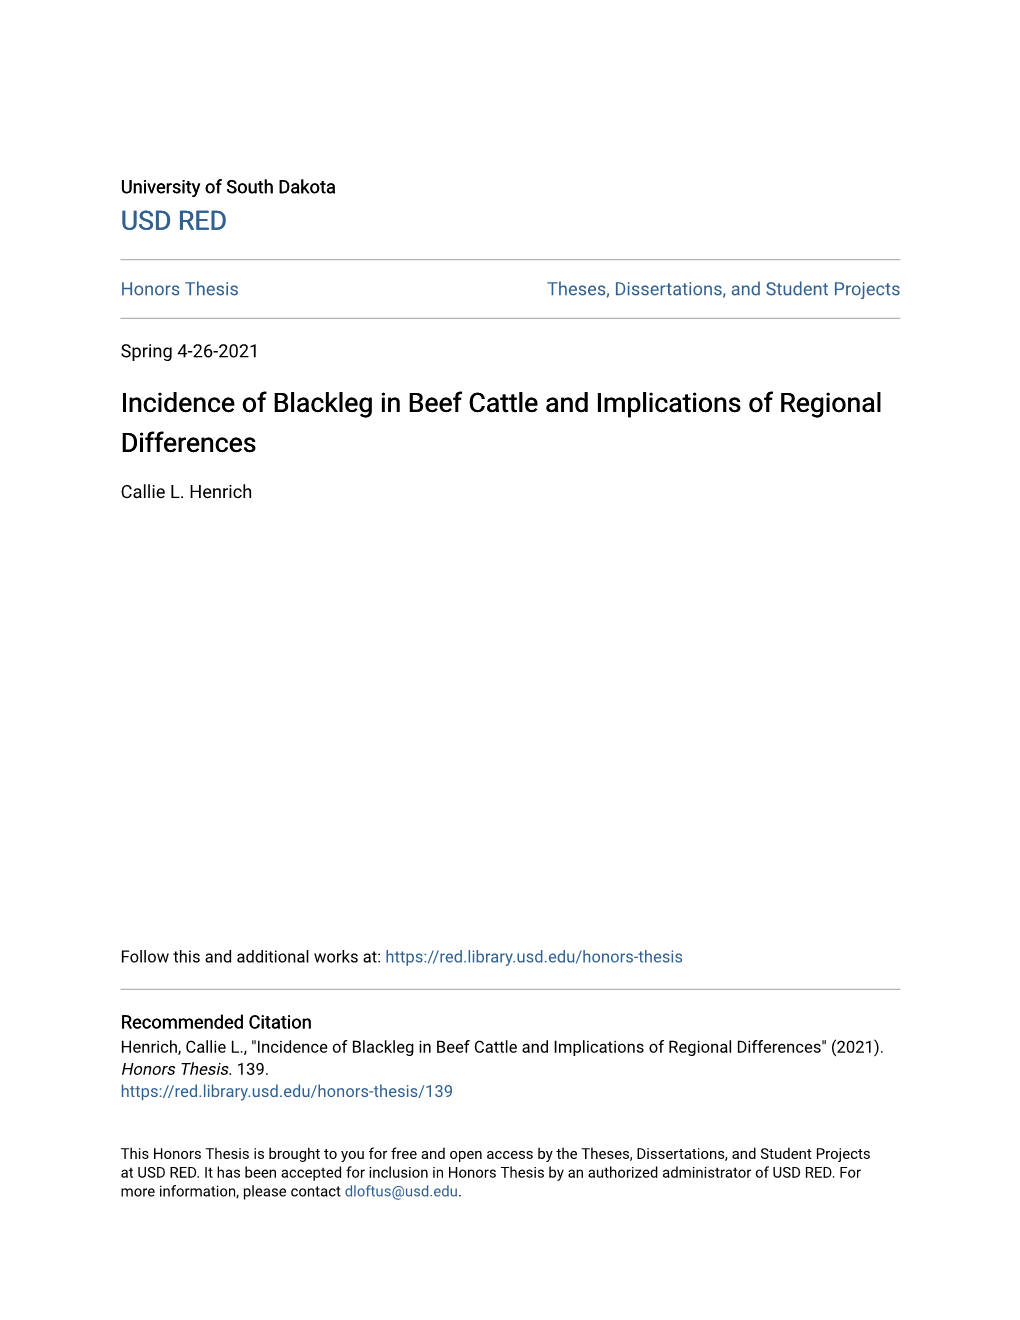 Incidence of Blackleg in Beef Cattle and Implications of Regional Differences